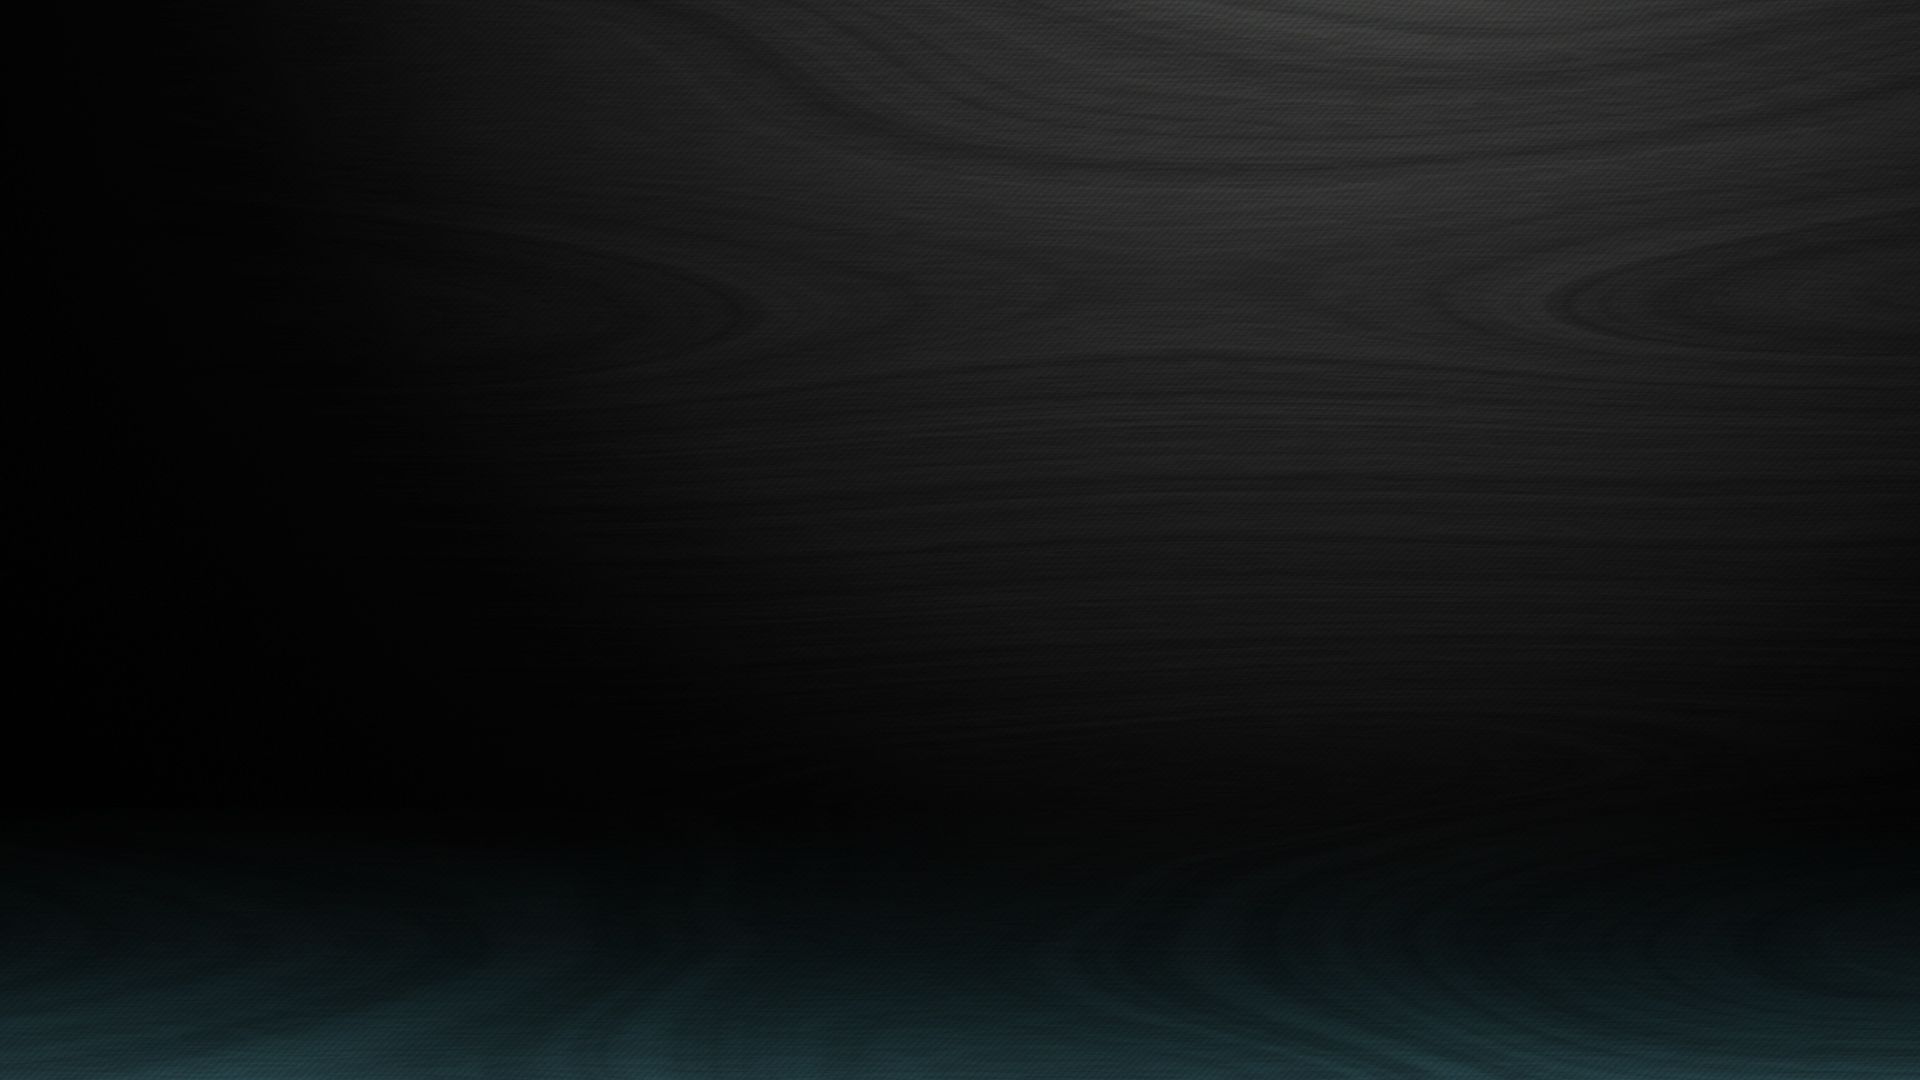 Black Textured 1920×1080 Wallpapers | The Art Mad Wallpapers